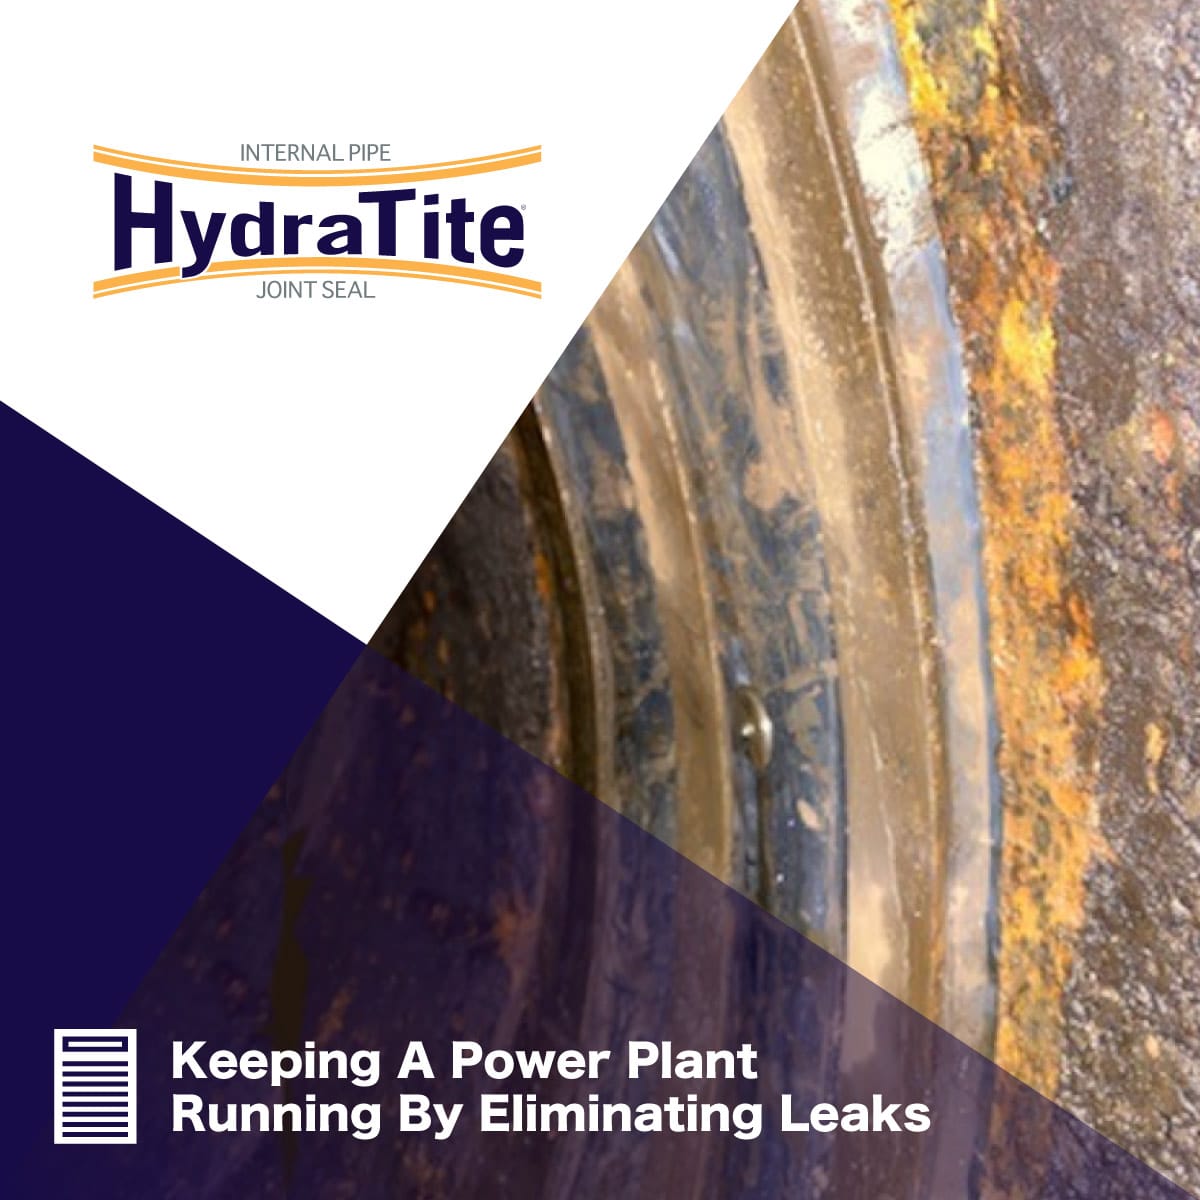 A close up of a HydraTite Seal covering a pipe joint, 'Keeping A Power Plant Running By Eliminating Leaks'